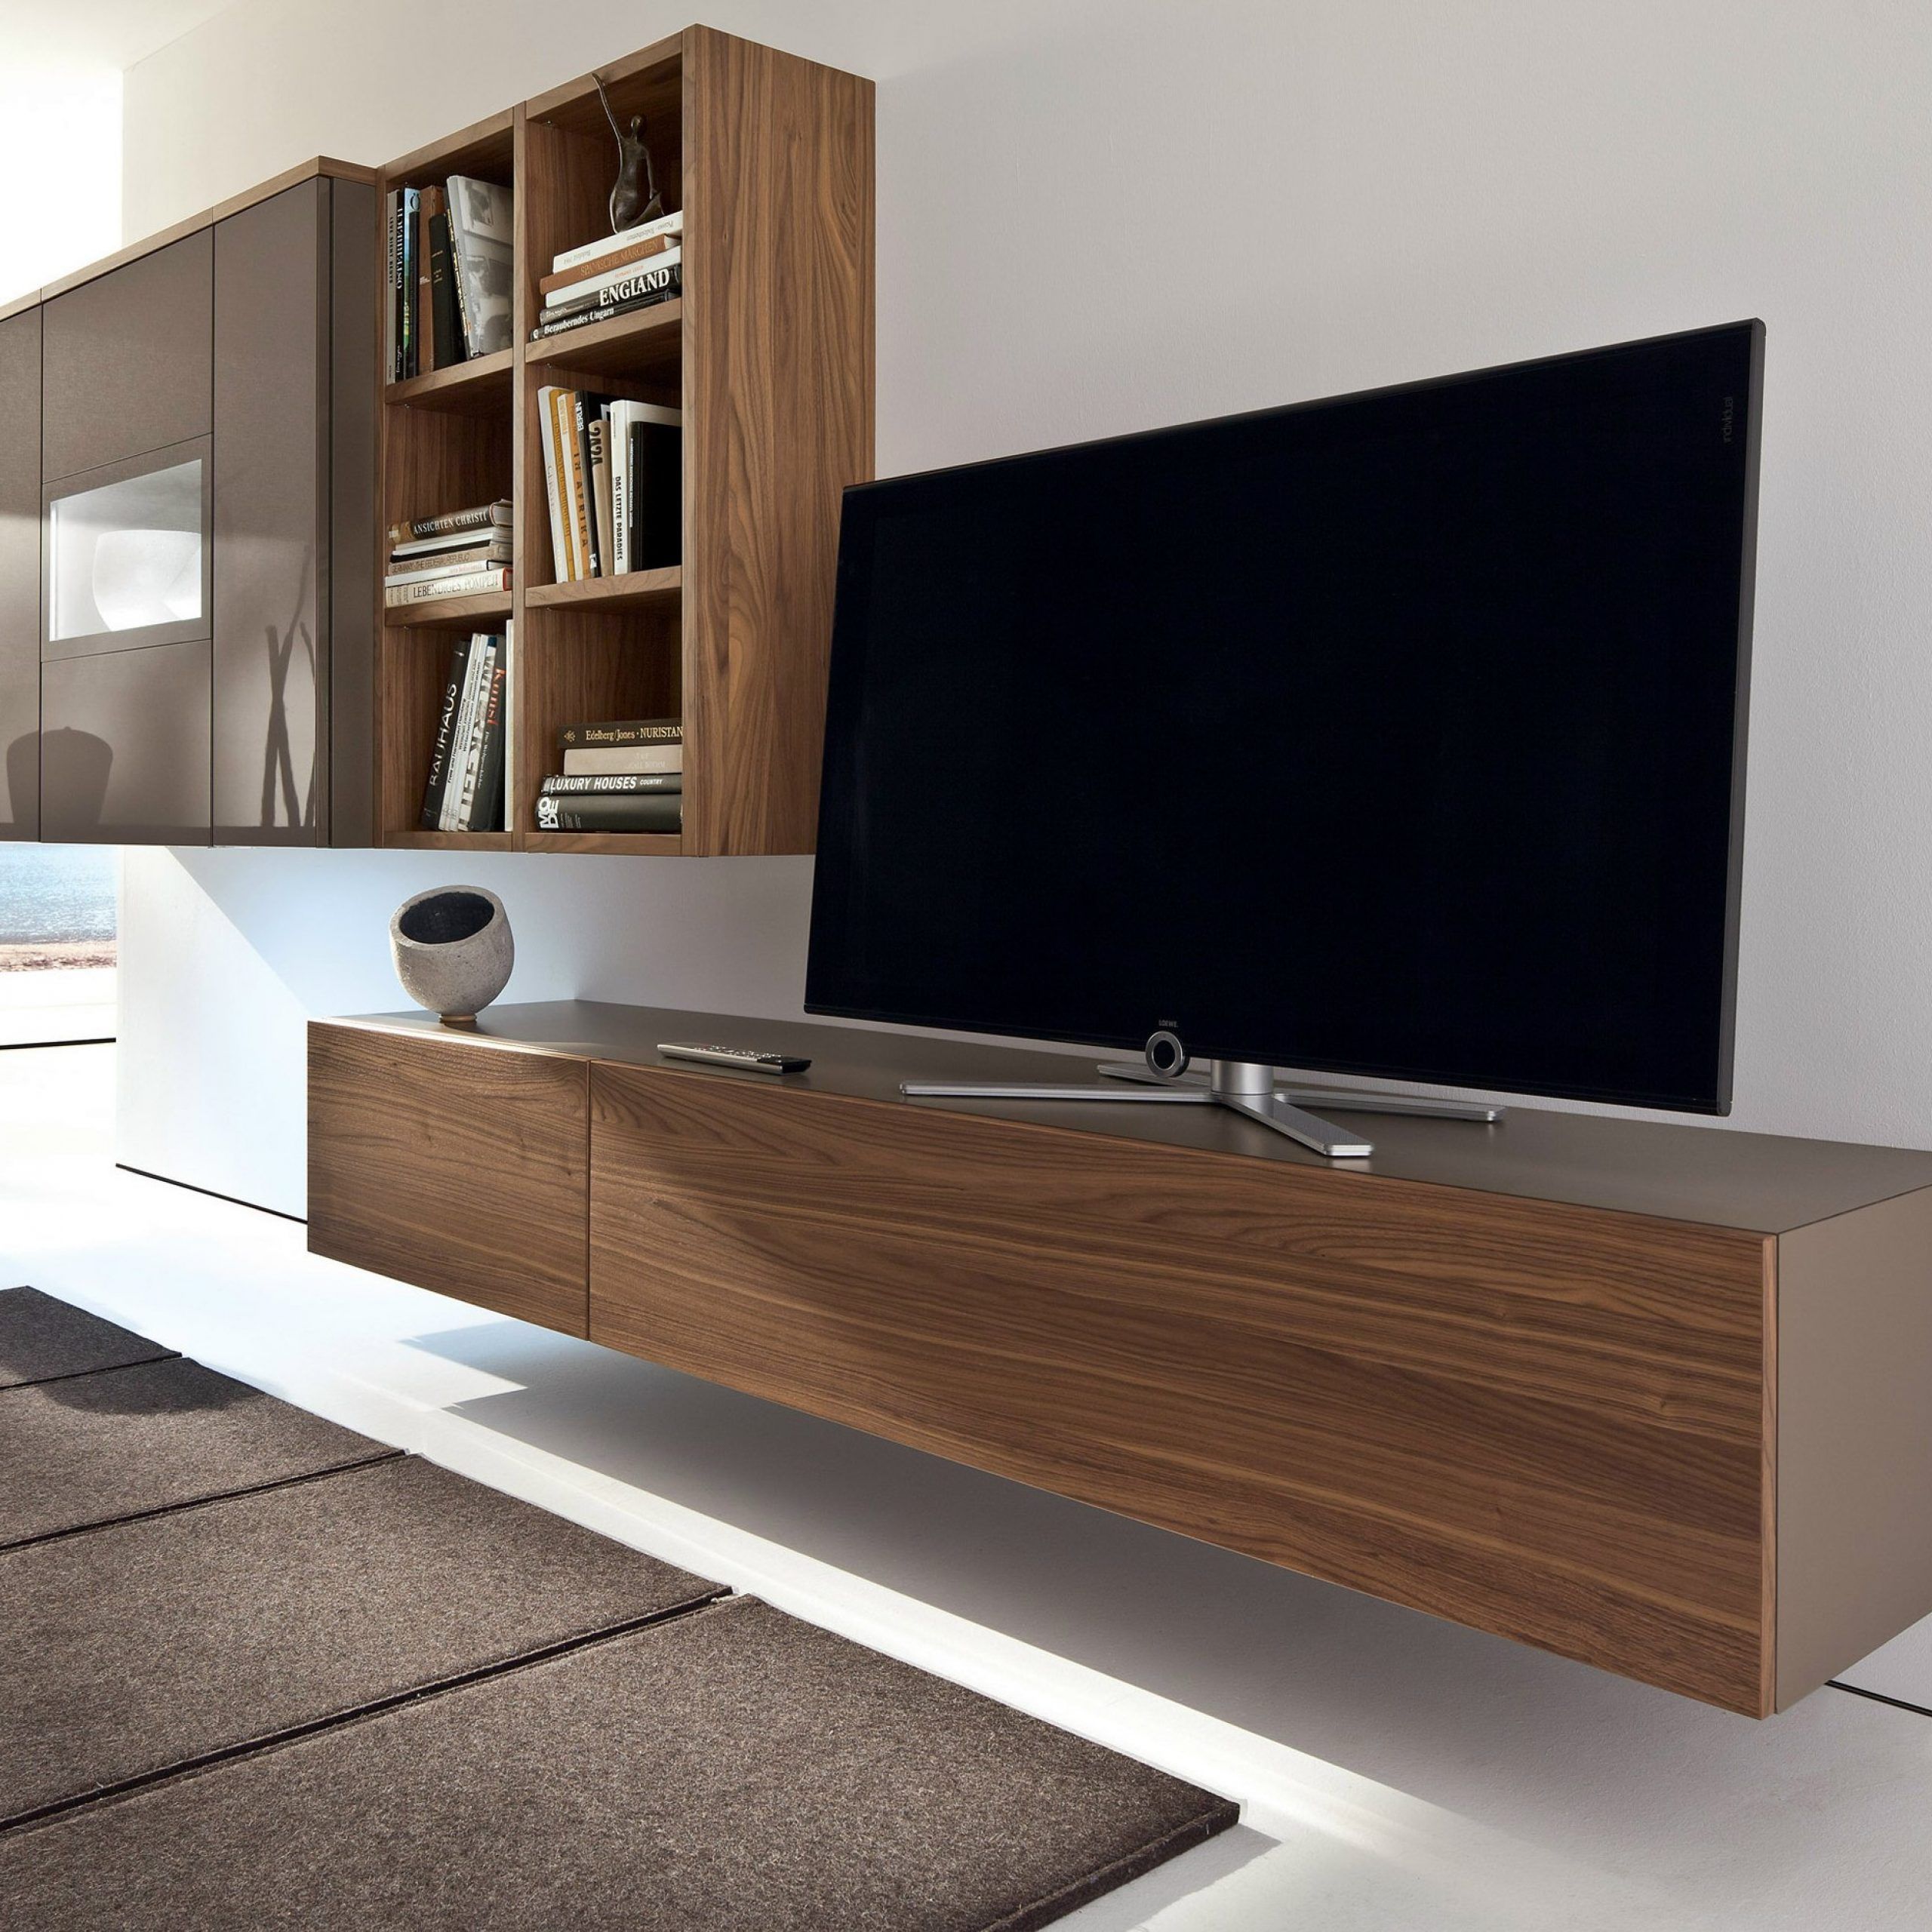 Neo Wall Mounted Tv Cabinethülsta Werke Hüls For Tv Stands And Cabinets (View 6 of 15)